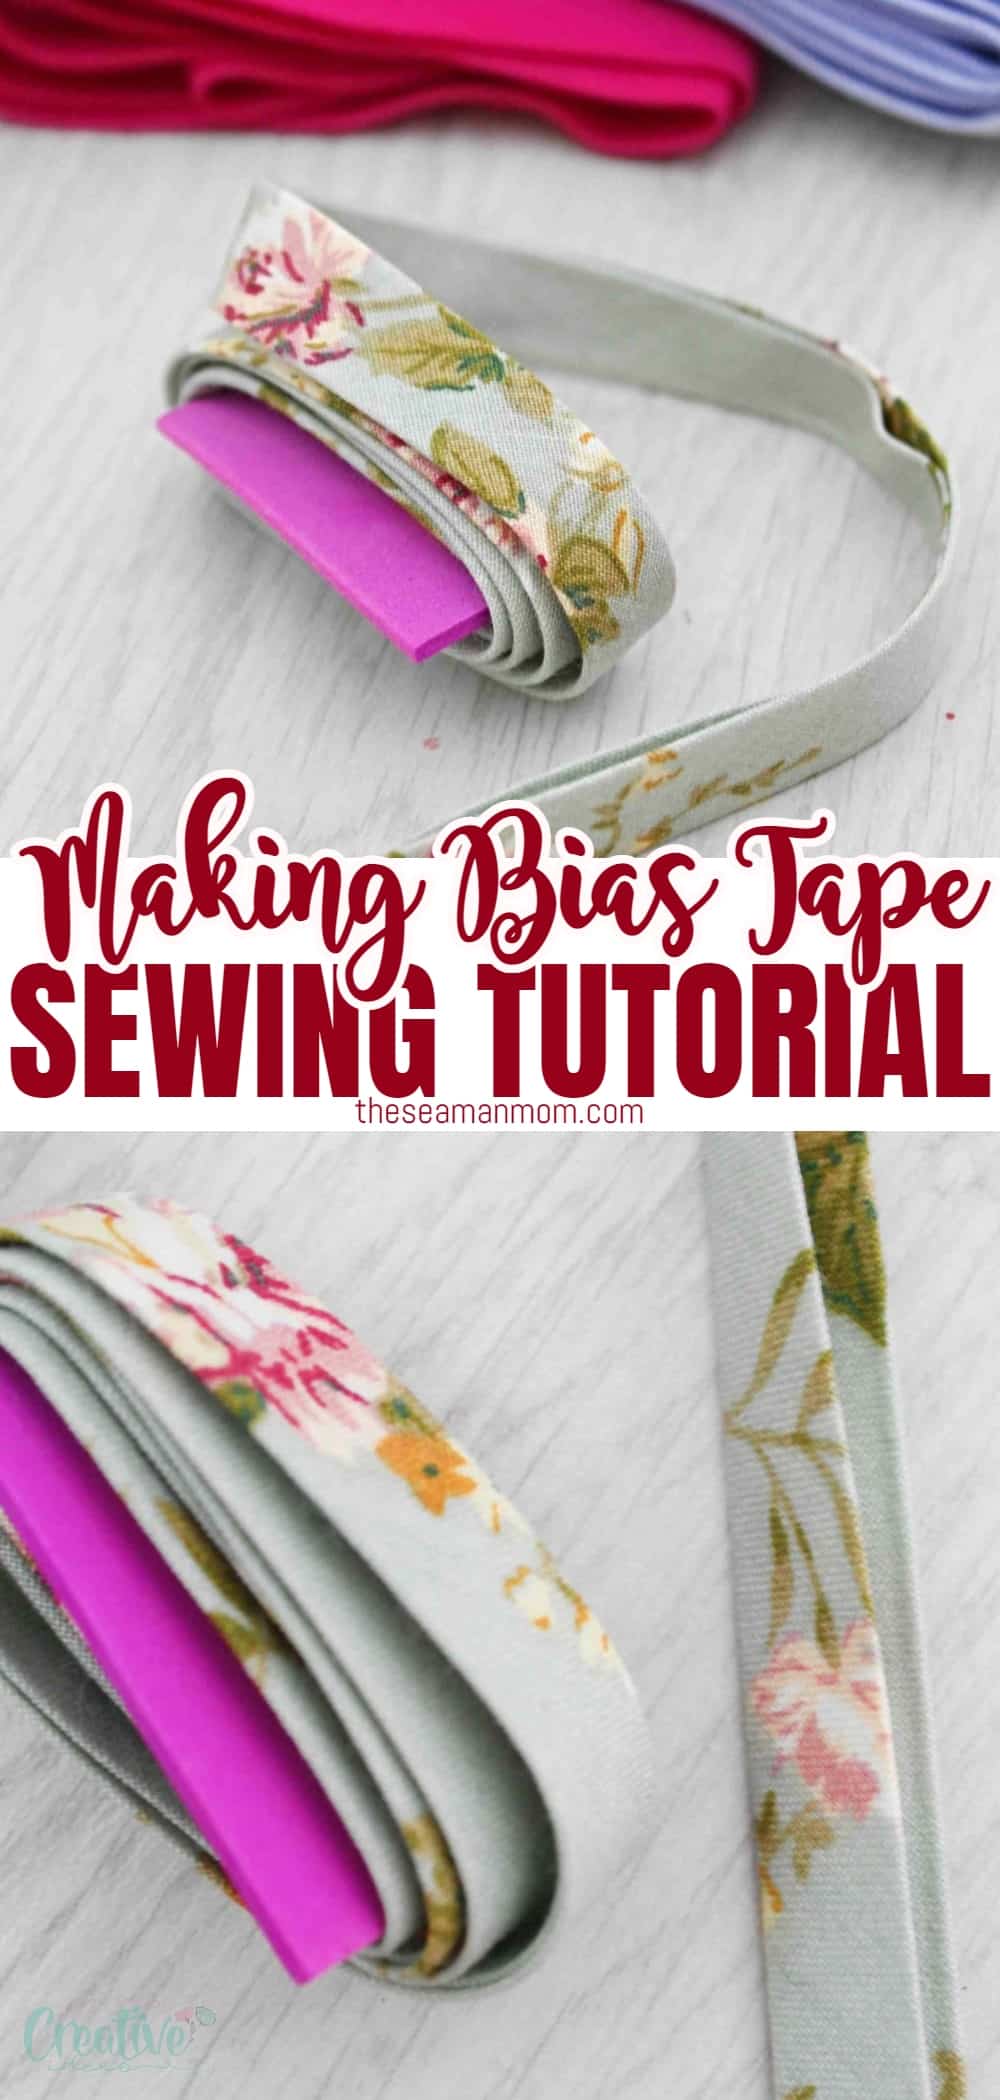 Why spend money on bias tape you're really not crazy about when you could create your own in the fabric size and length you need? Making bias tape at home could not be easier so you won't need to compromise anymore and use bias binding that's simply not perfect for your project! Here's how to make bias tape, in a simple and easy tutorial that covers both single fold bias tape and double fold bias tape! via @petroneagu